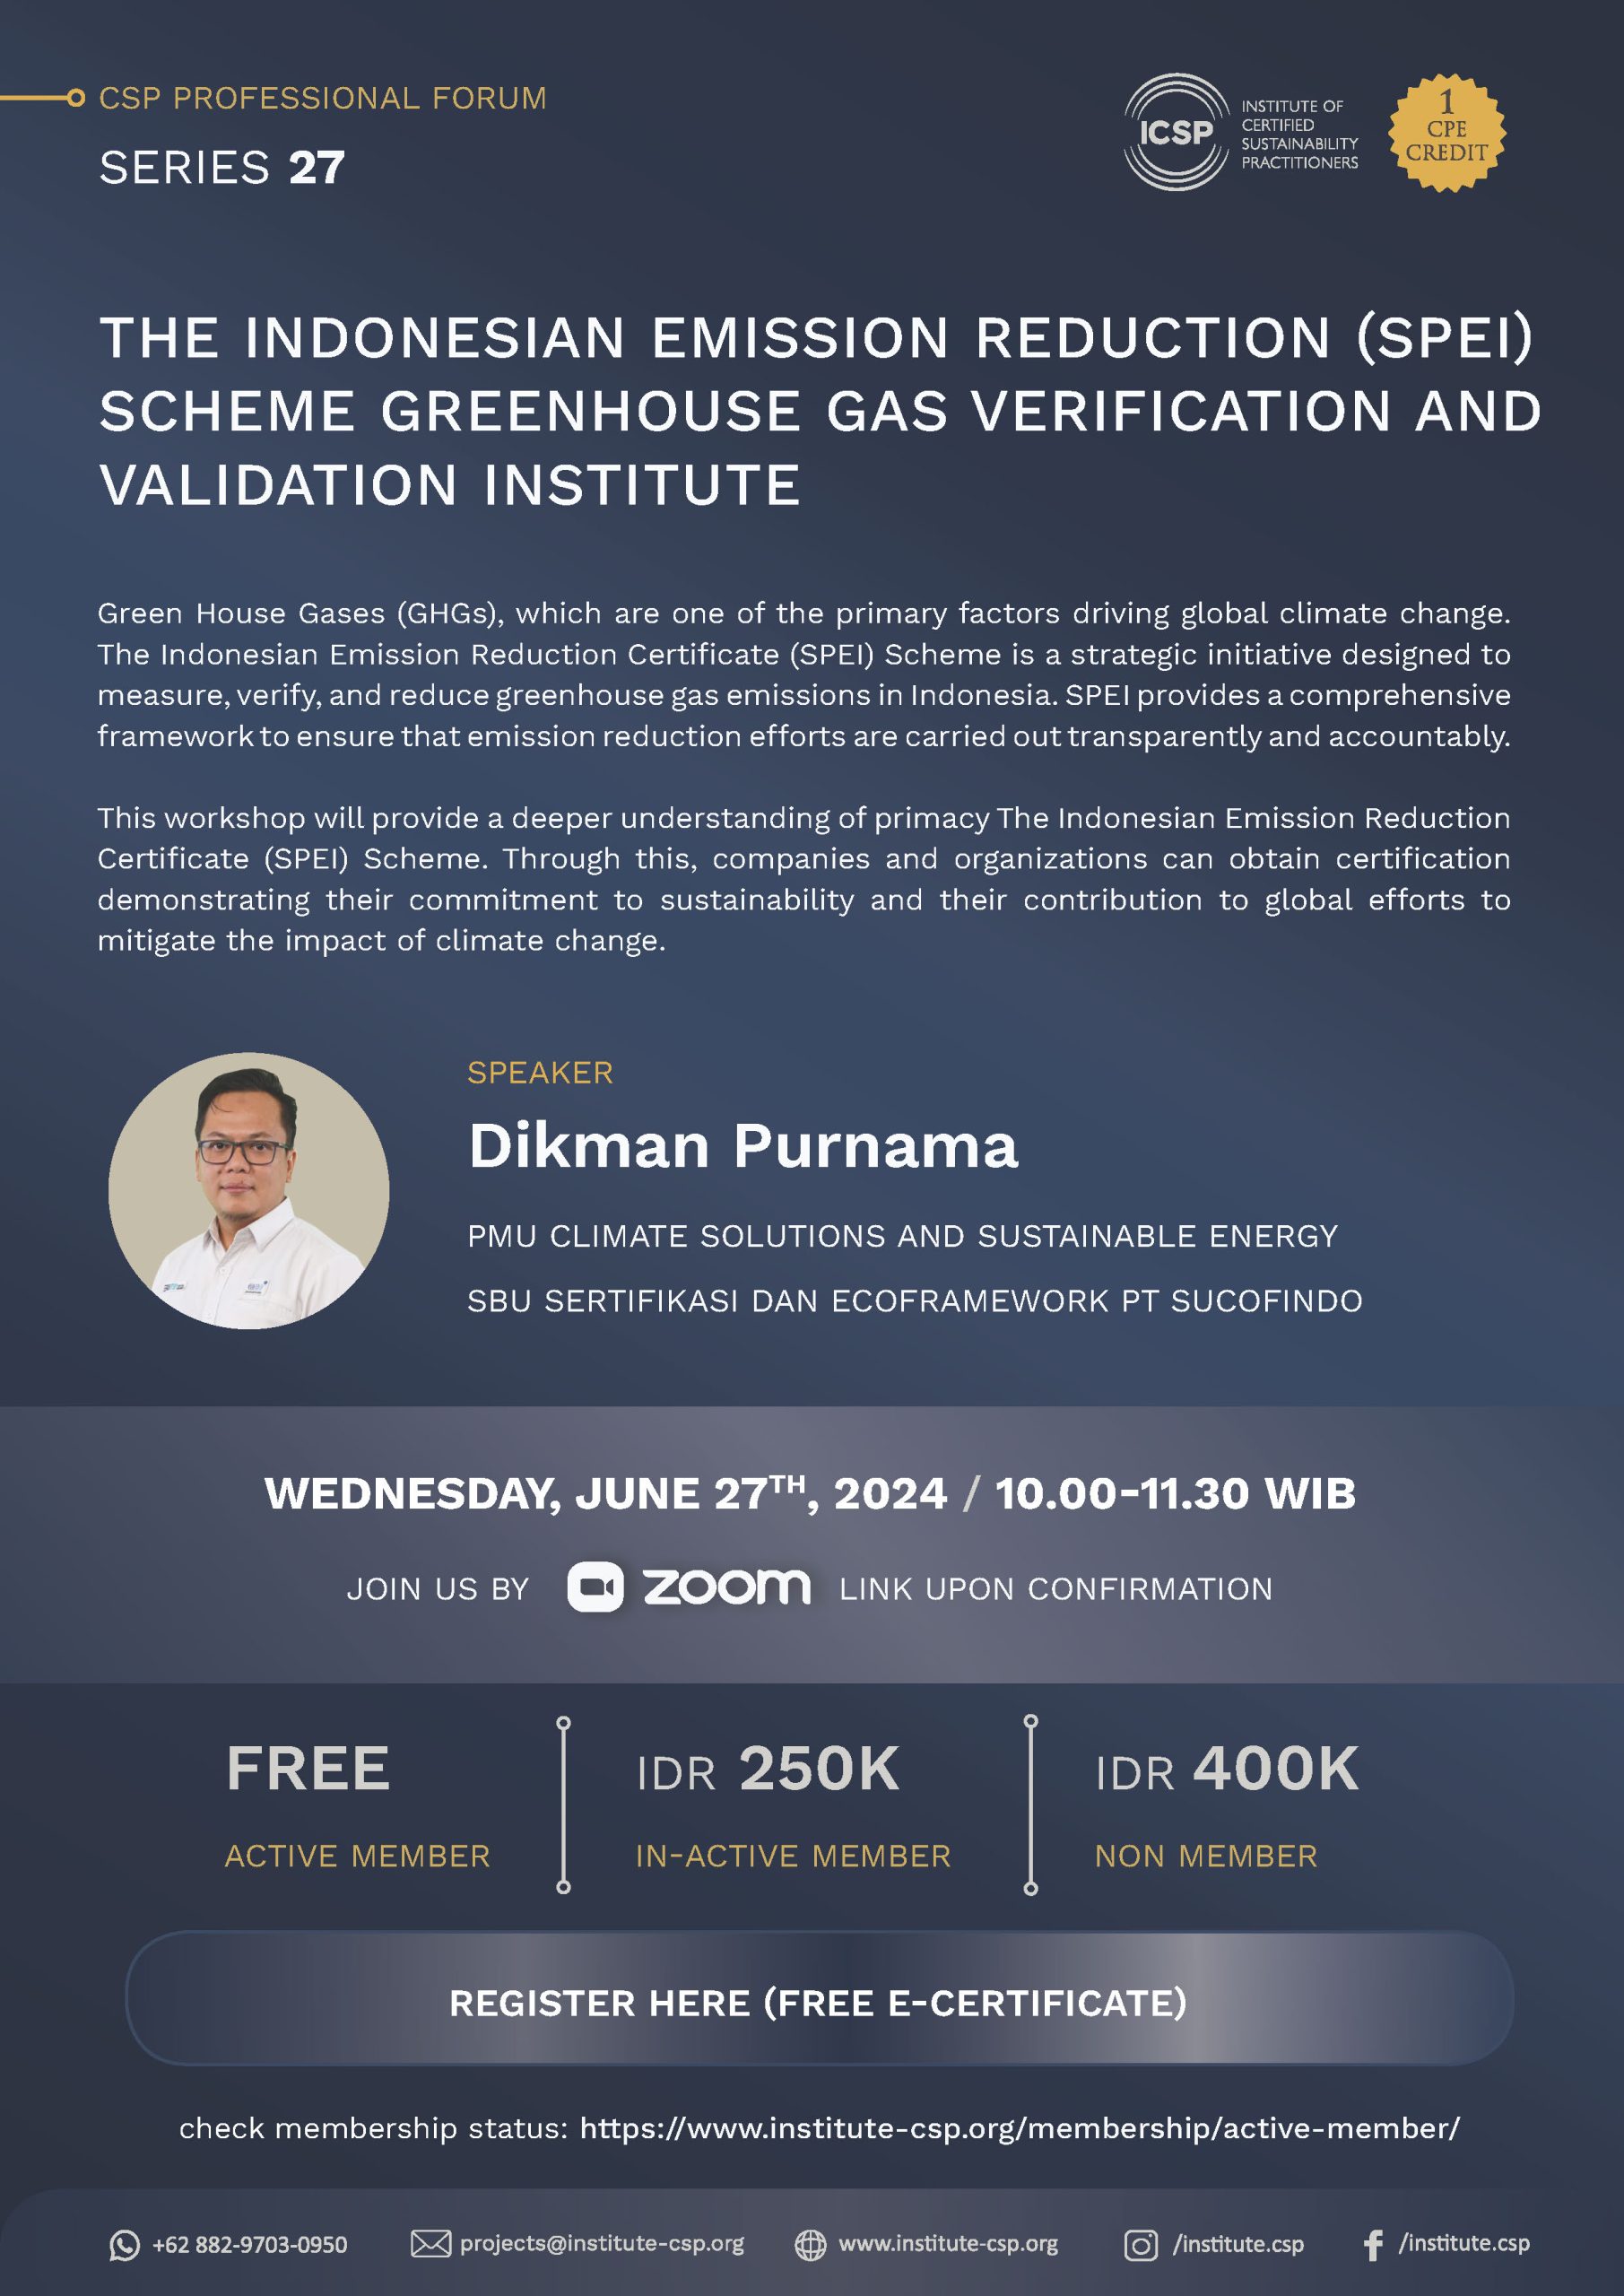 This workshop will provide a deeper understanding of primacy The Indonesian Emission Reduction Certificate (SPEI) Scheme. Through this, companies and organizations can obtain certification demonstrating their commitment to sustainability and their contribution to global efforts to mitigate the impact of climate change.